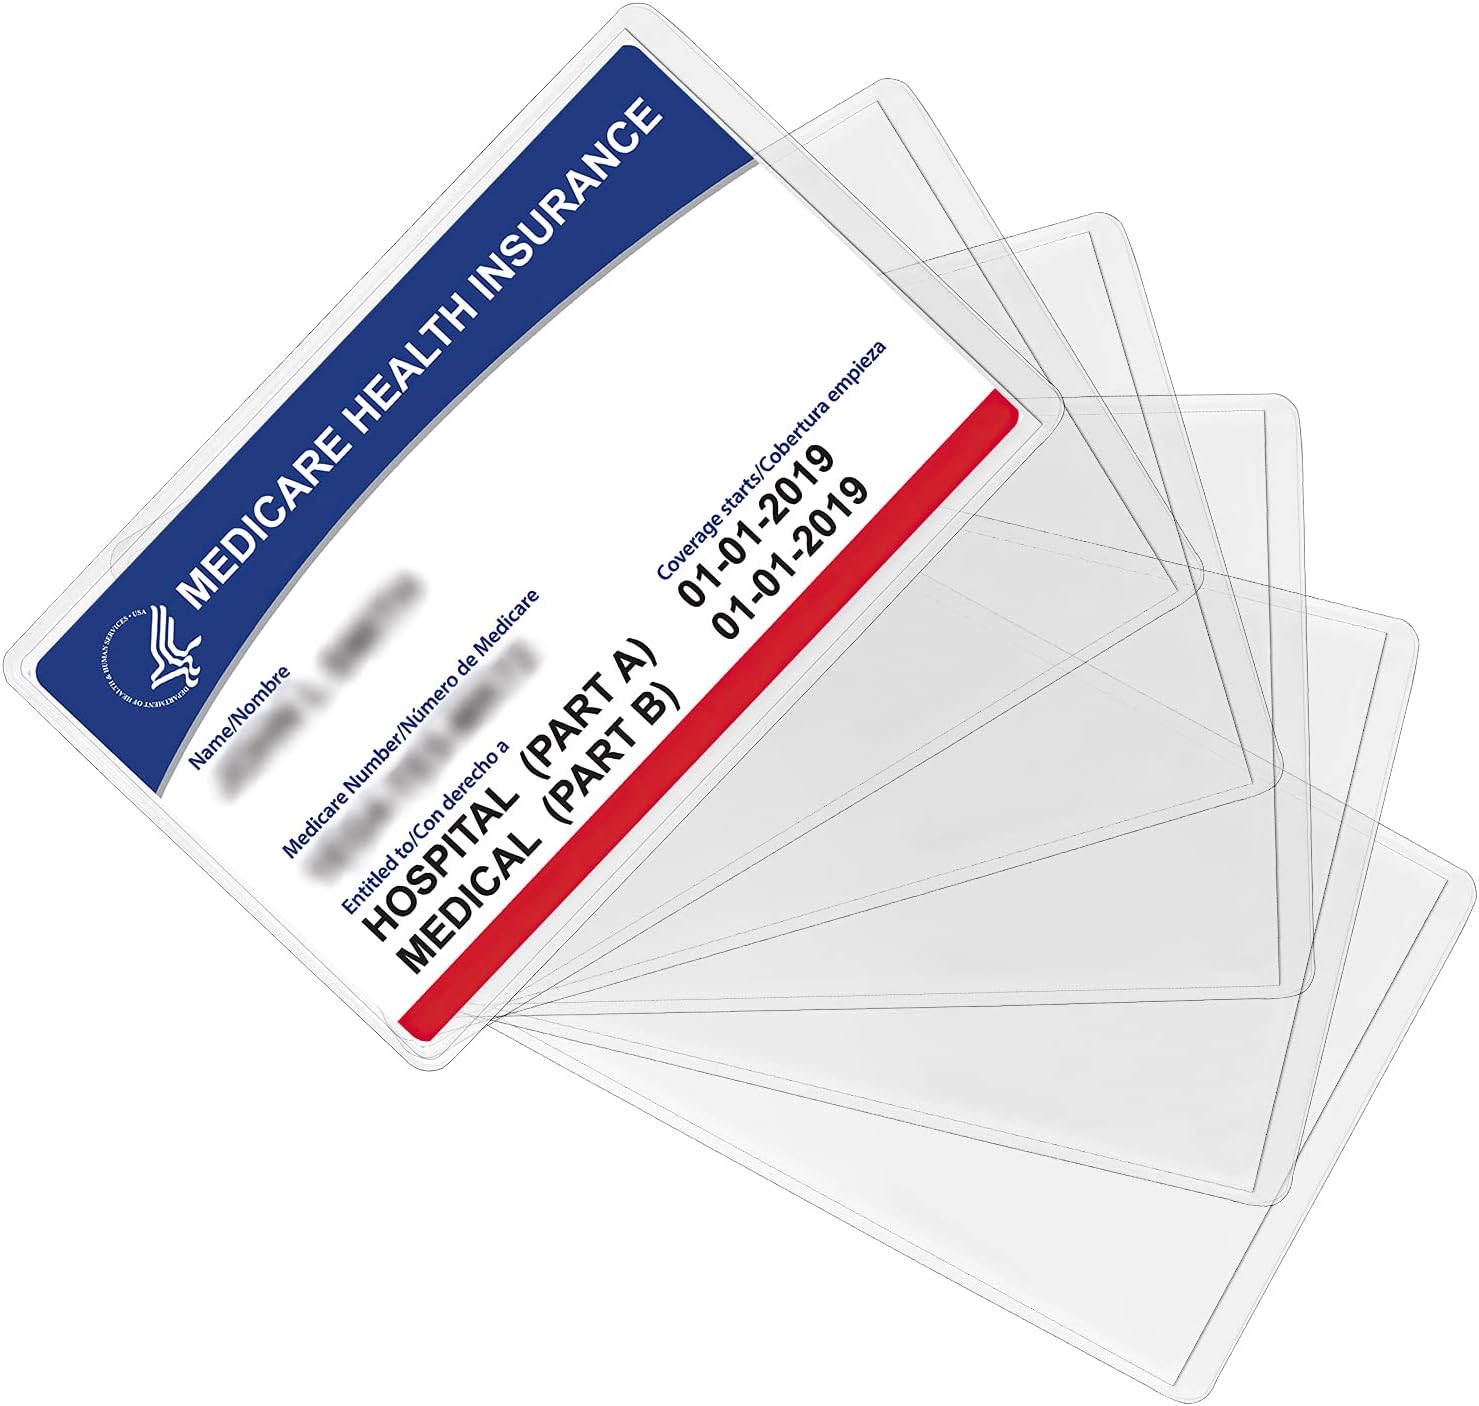 Sooez 20 Pack New Medicare Card Holder Protector Sleeves, 12Mil Clear PVC Soft Water Resistant Medicare Card Protector Sleeves for New Medicare Card Credit Card Business Card Social Security Card